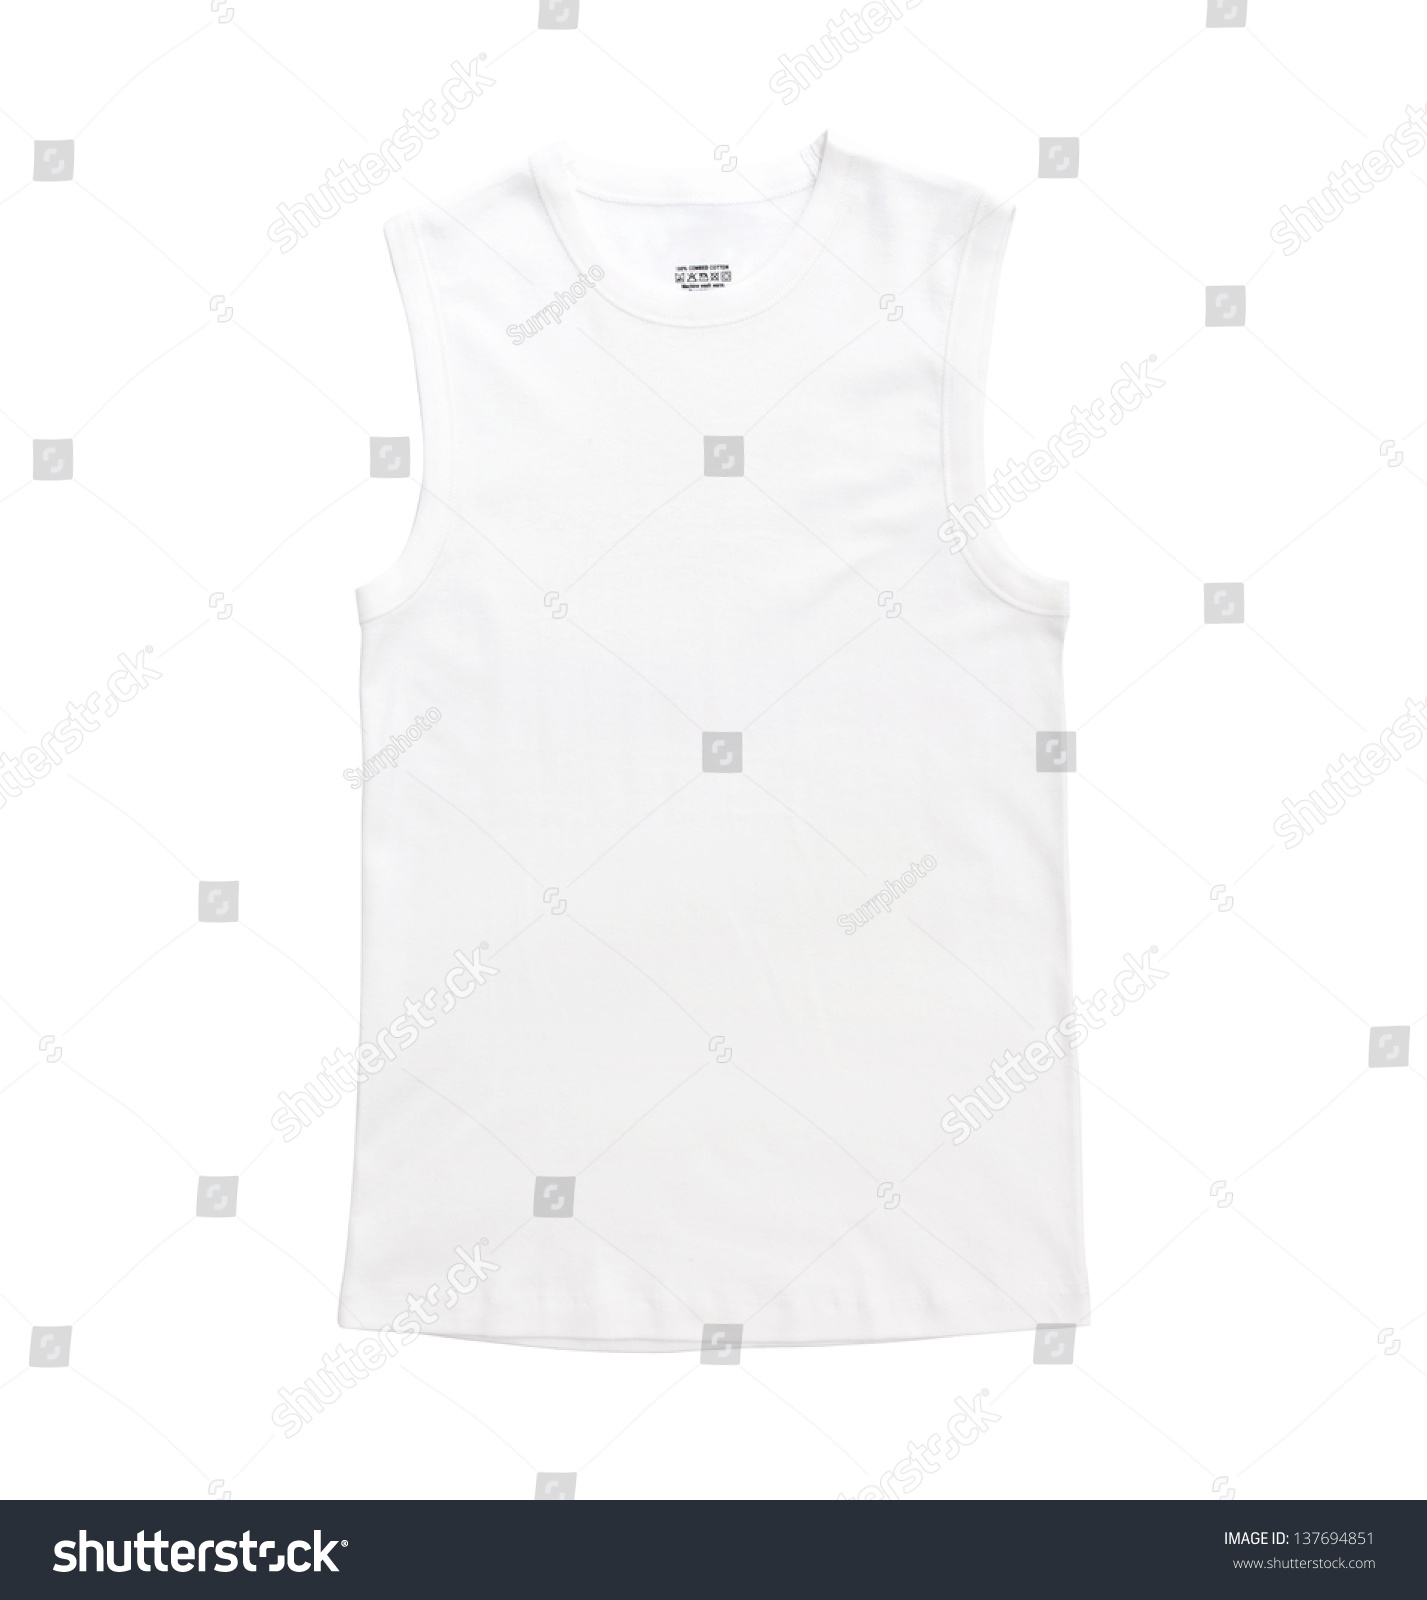 White Tank Top Tshirt Template Ready For Your Own Graphics. Stock Photo ...